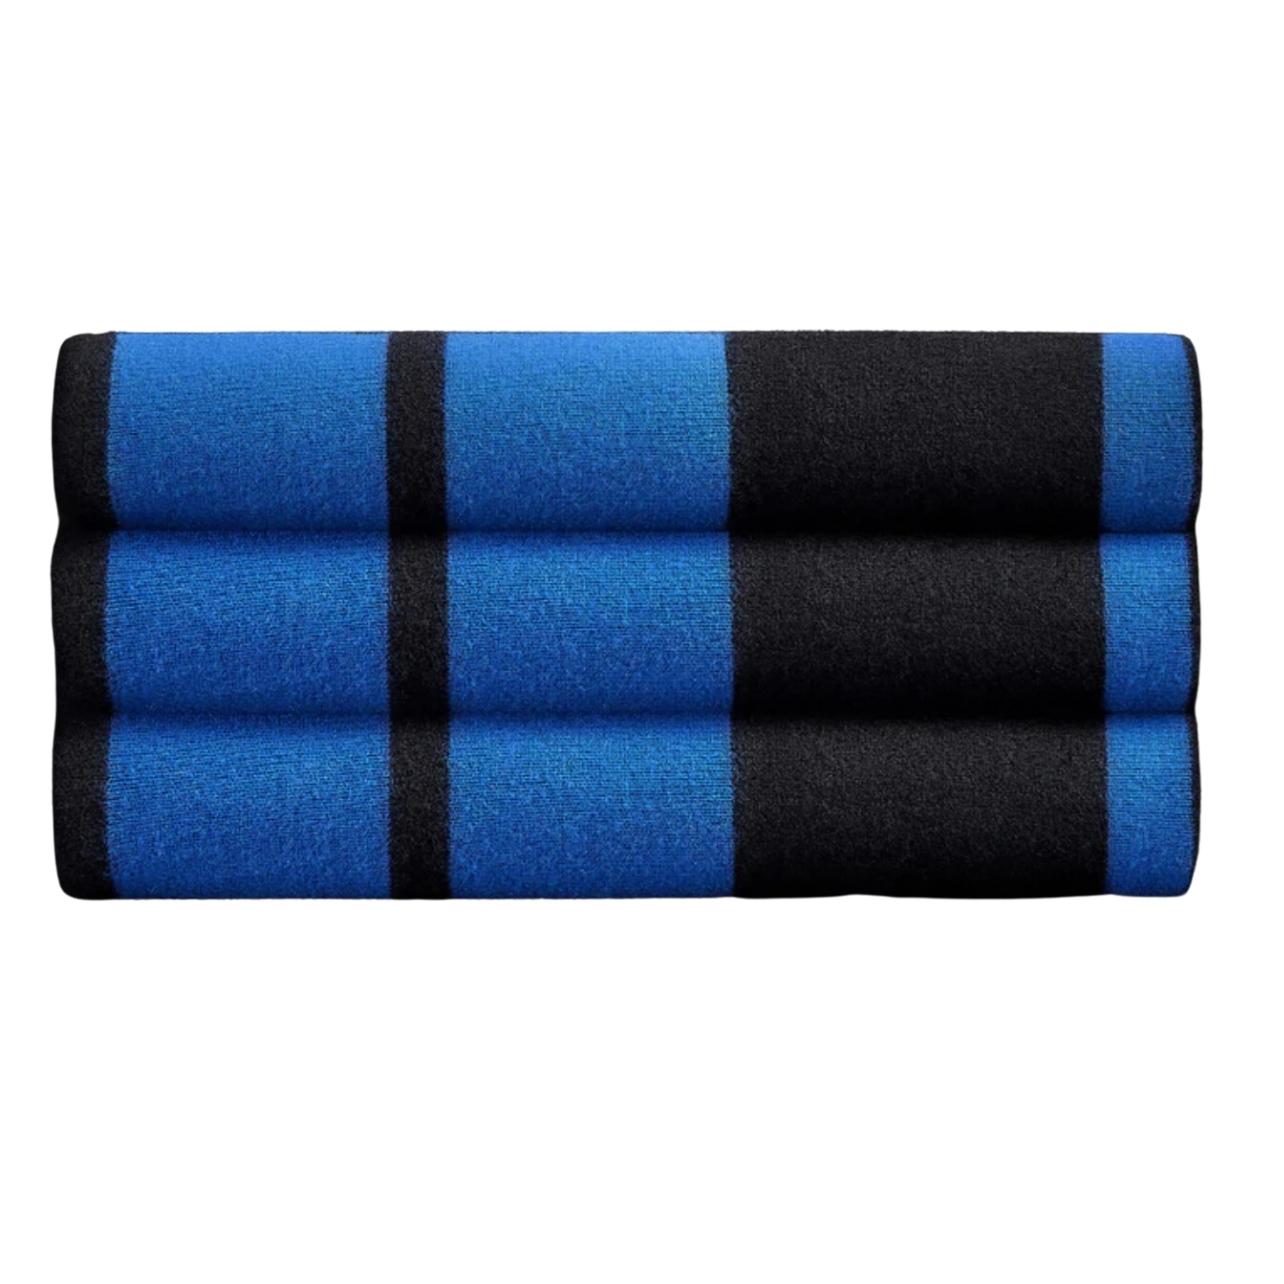 James Perse black cashmere throw with red stripes